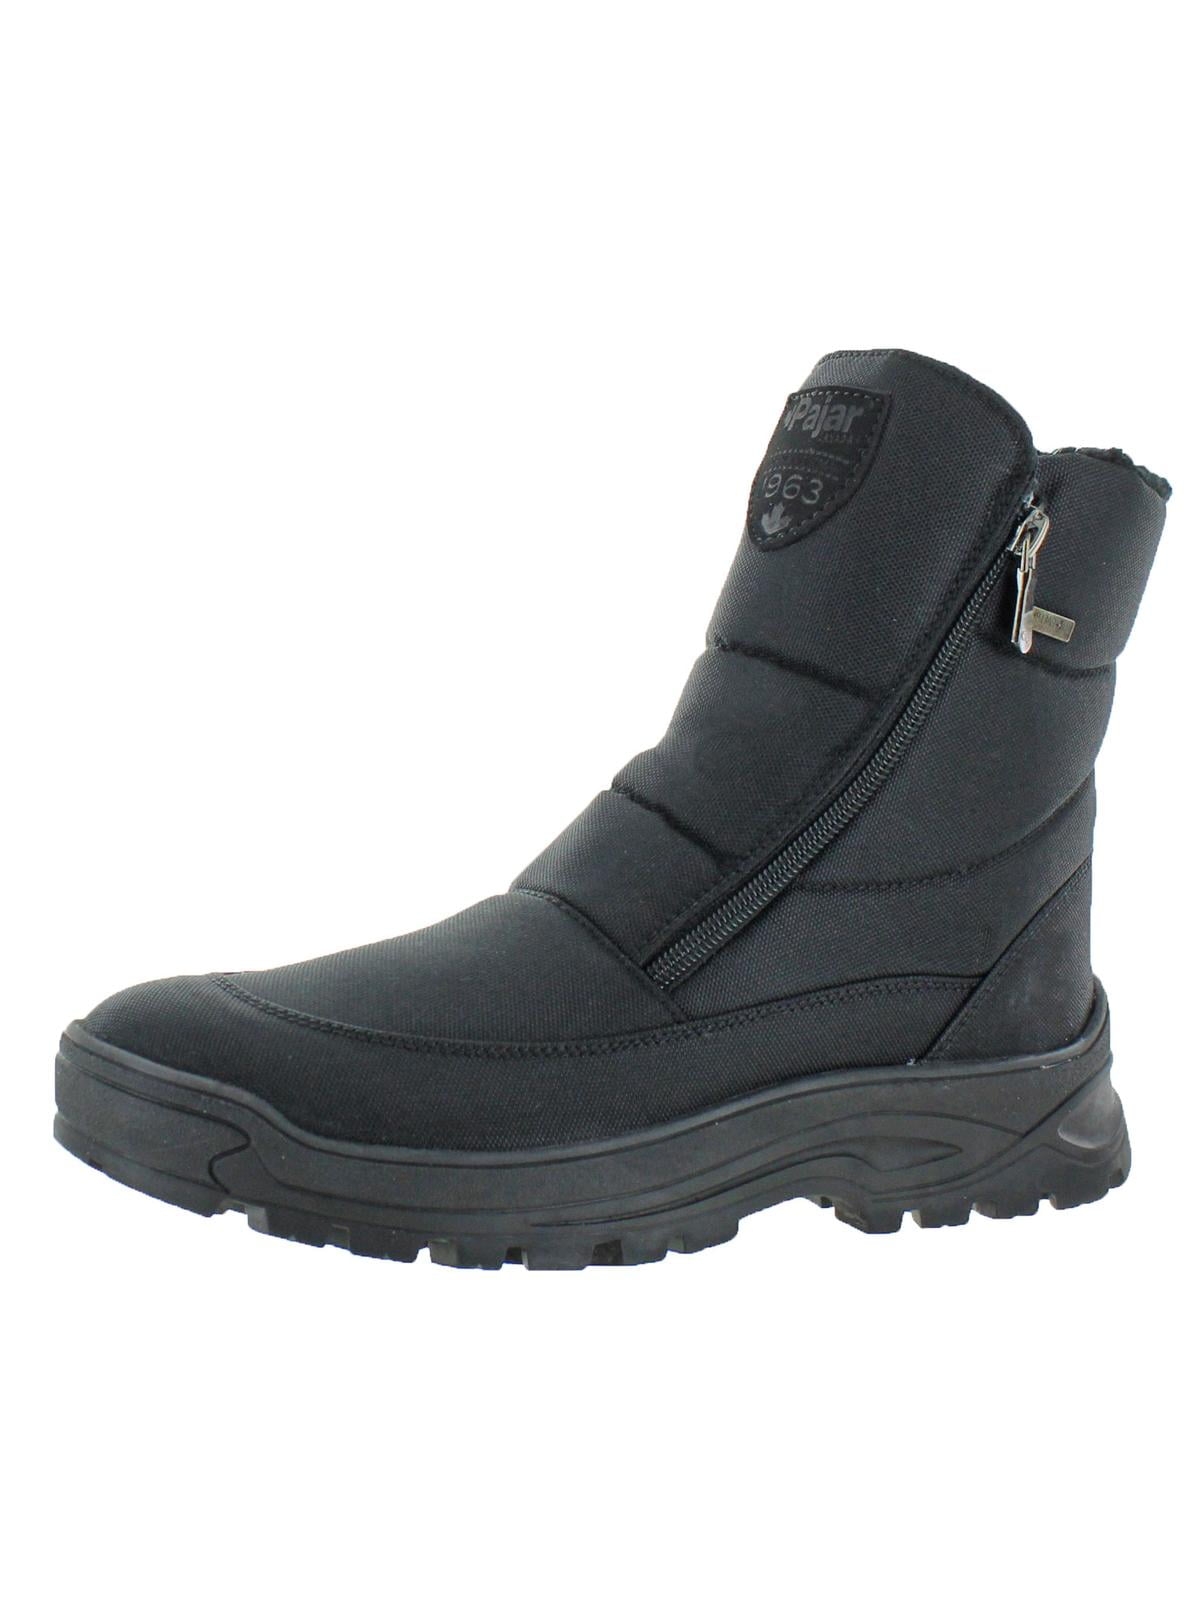 pajar boots with ice cleats